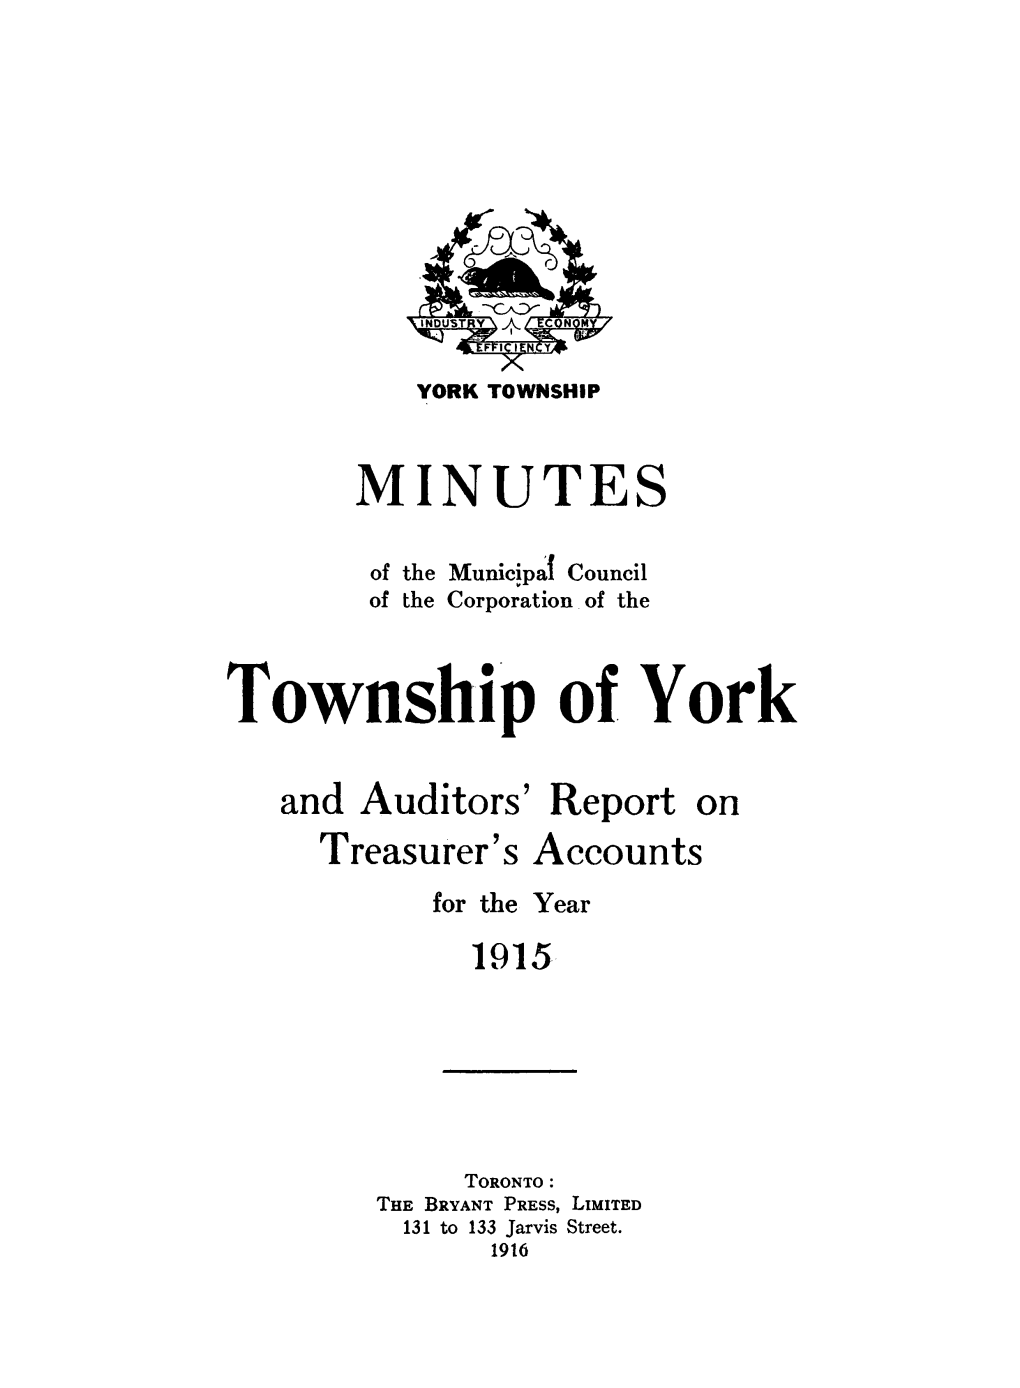 Township of York and Auditors' Report on Treasurer's Accounts for the Year 1915